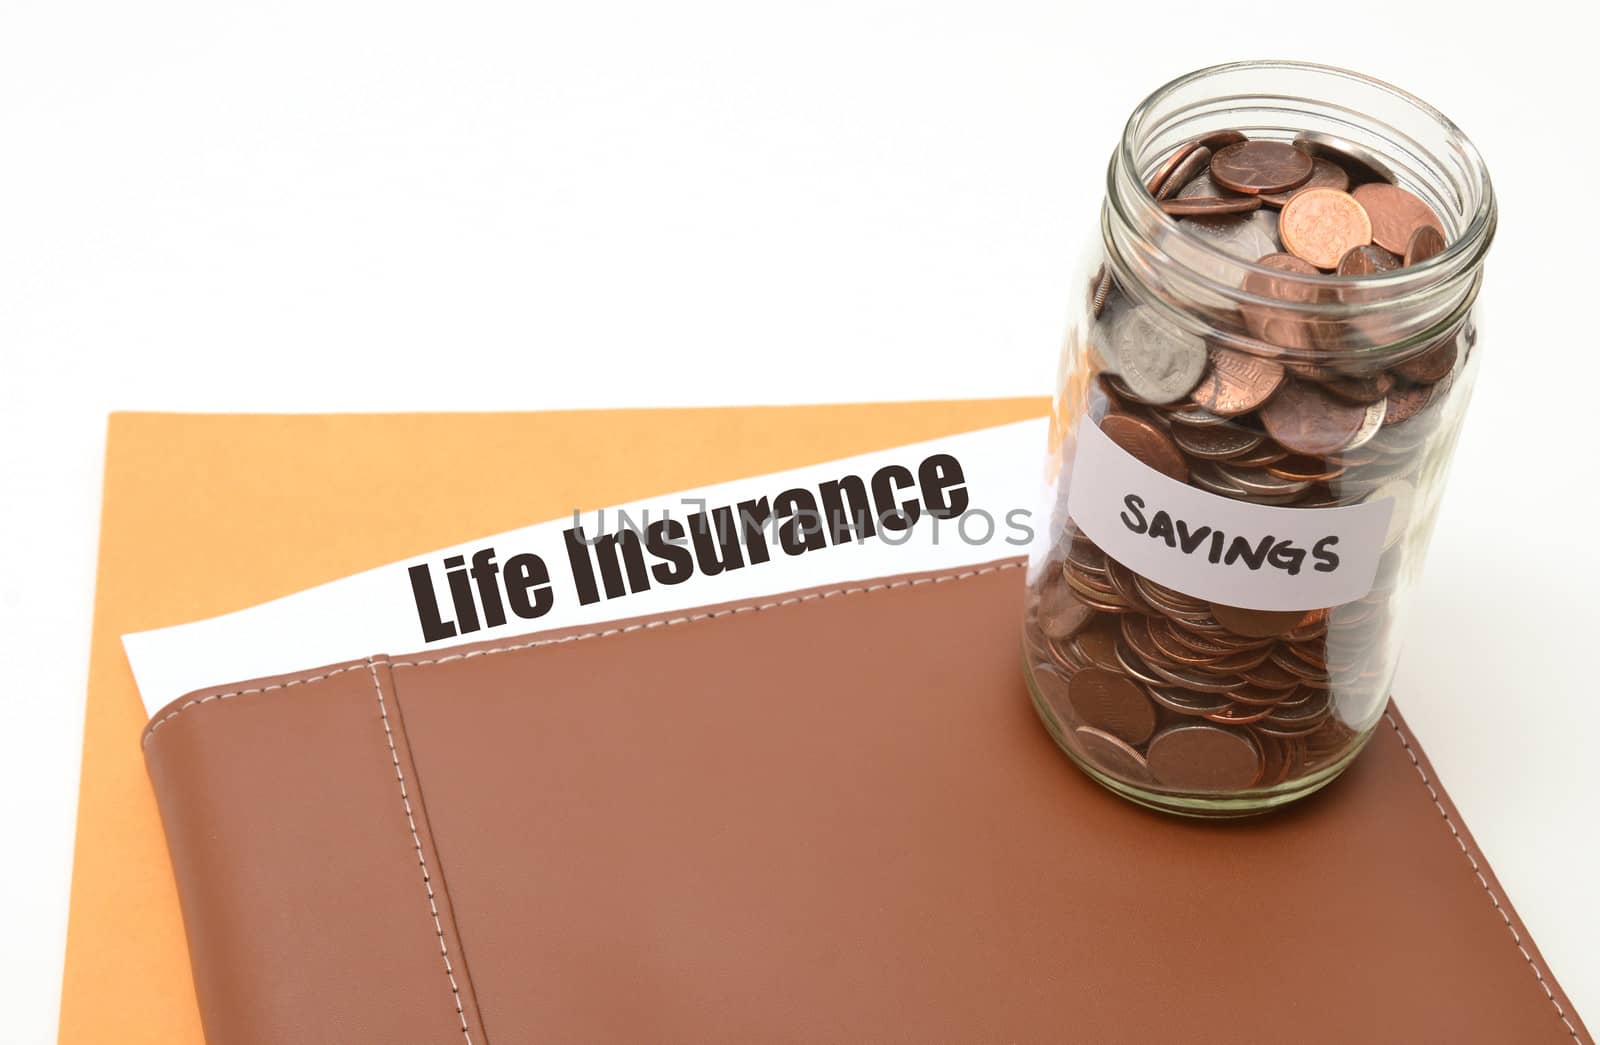 save money on life insurance by ftlaudgirl